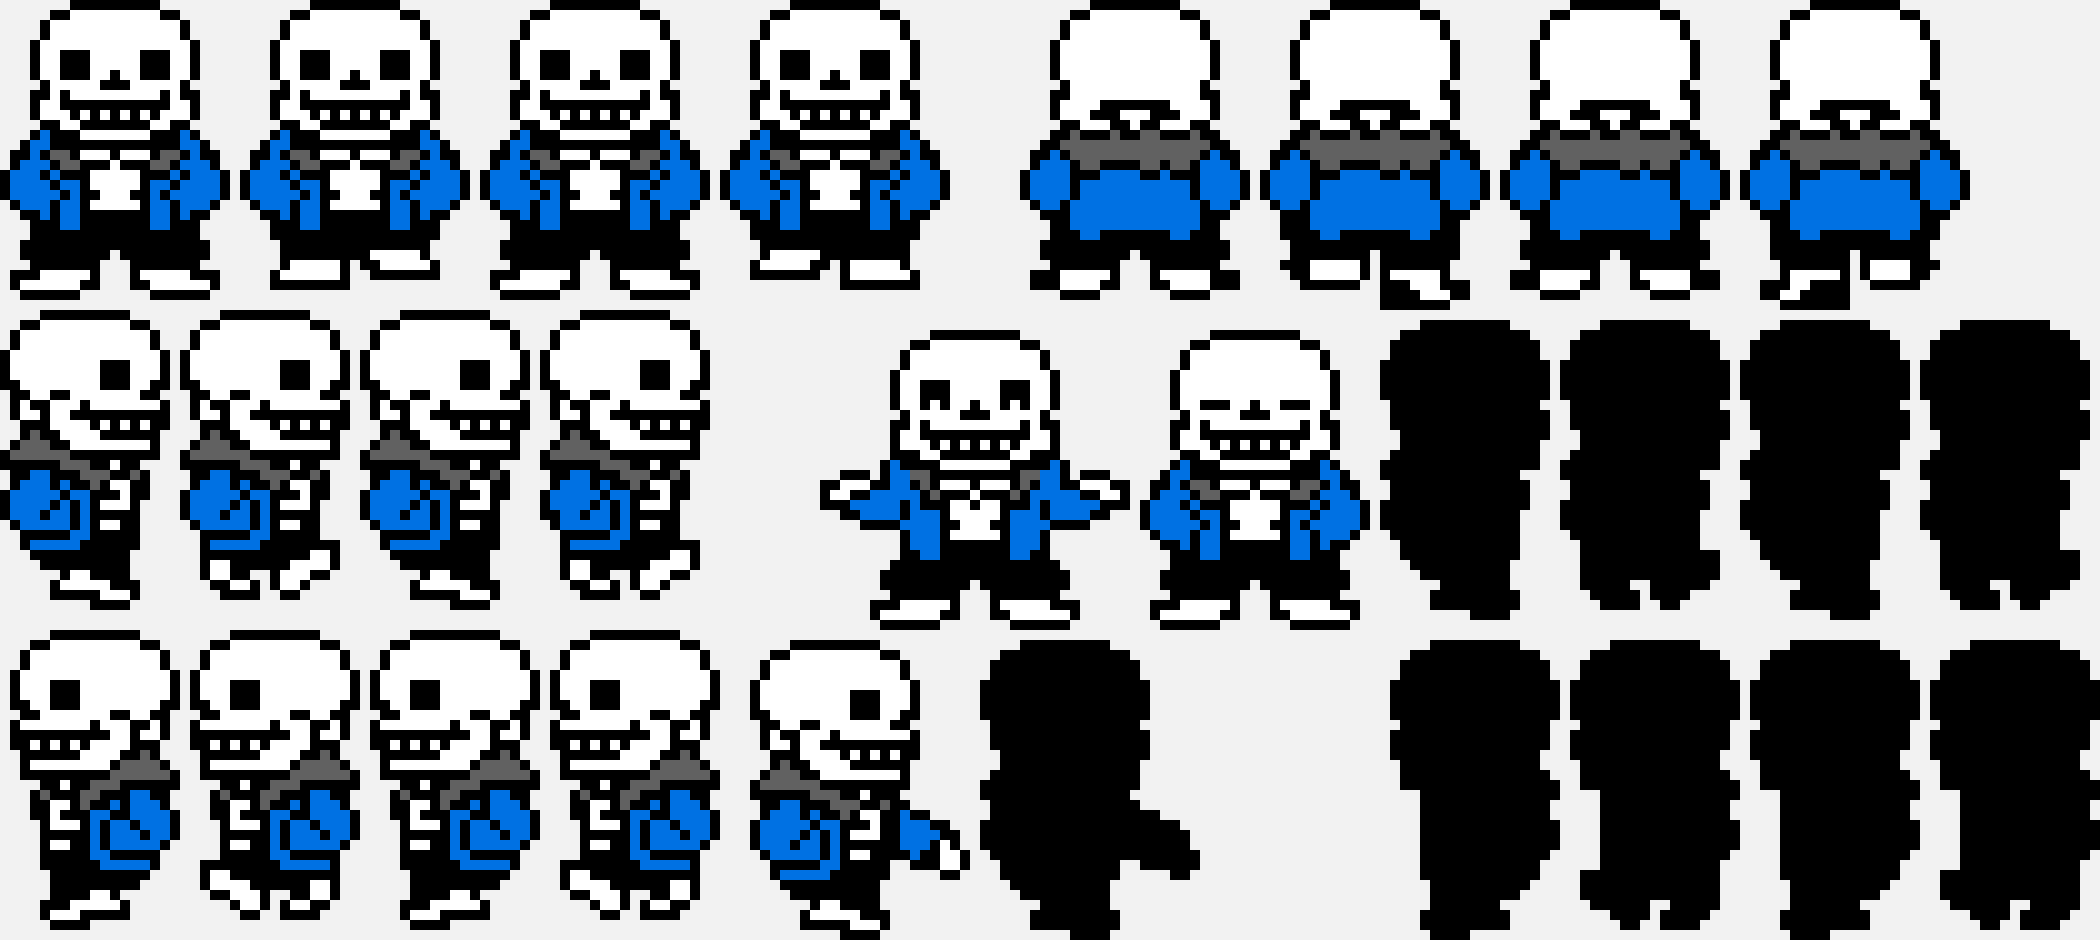 Sans Undertale Sprite Png : Look at links below to get more options for ...